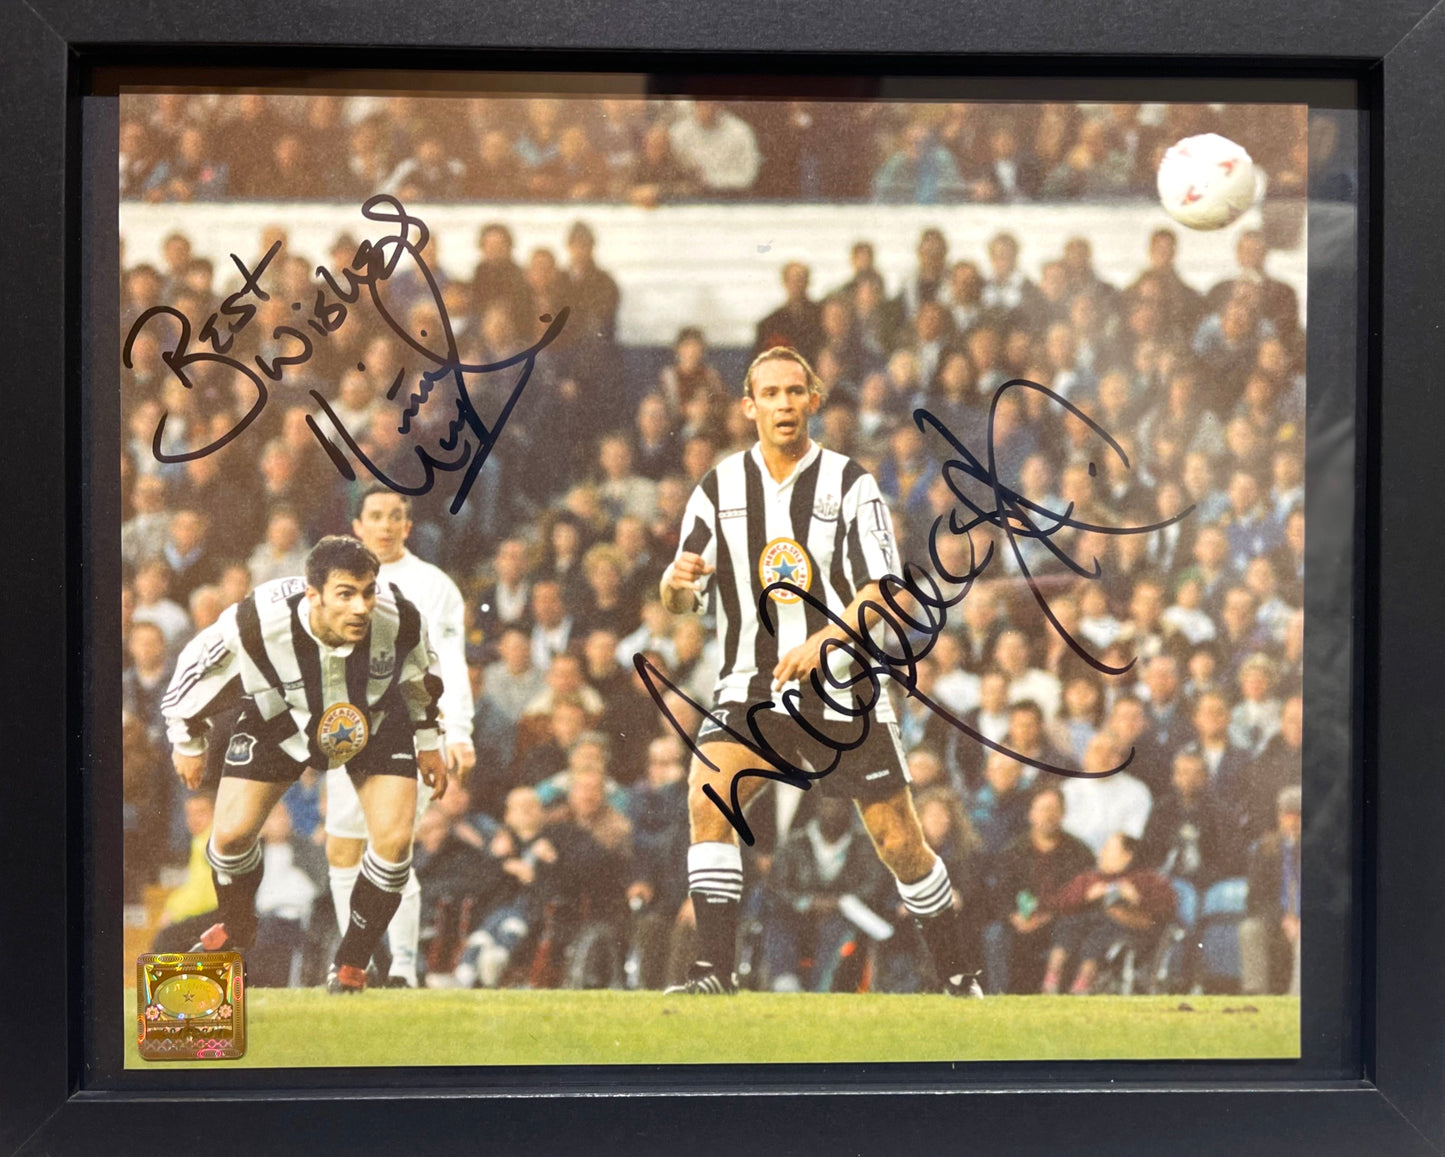 KEITH GILLESPIE AND DARREN PEACOCK HAND SIGNED NEWCASTLE UNITED PHOTO WITH COA